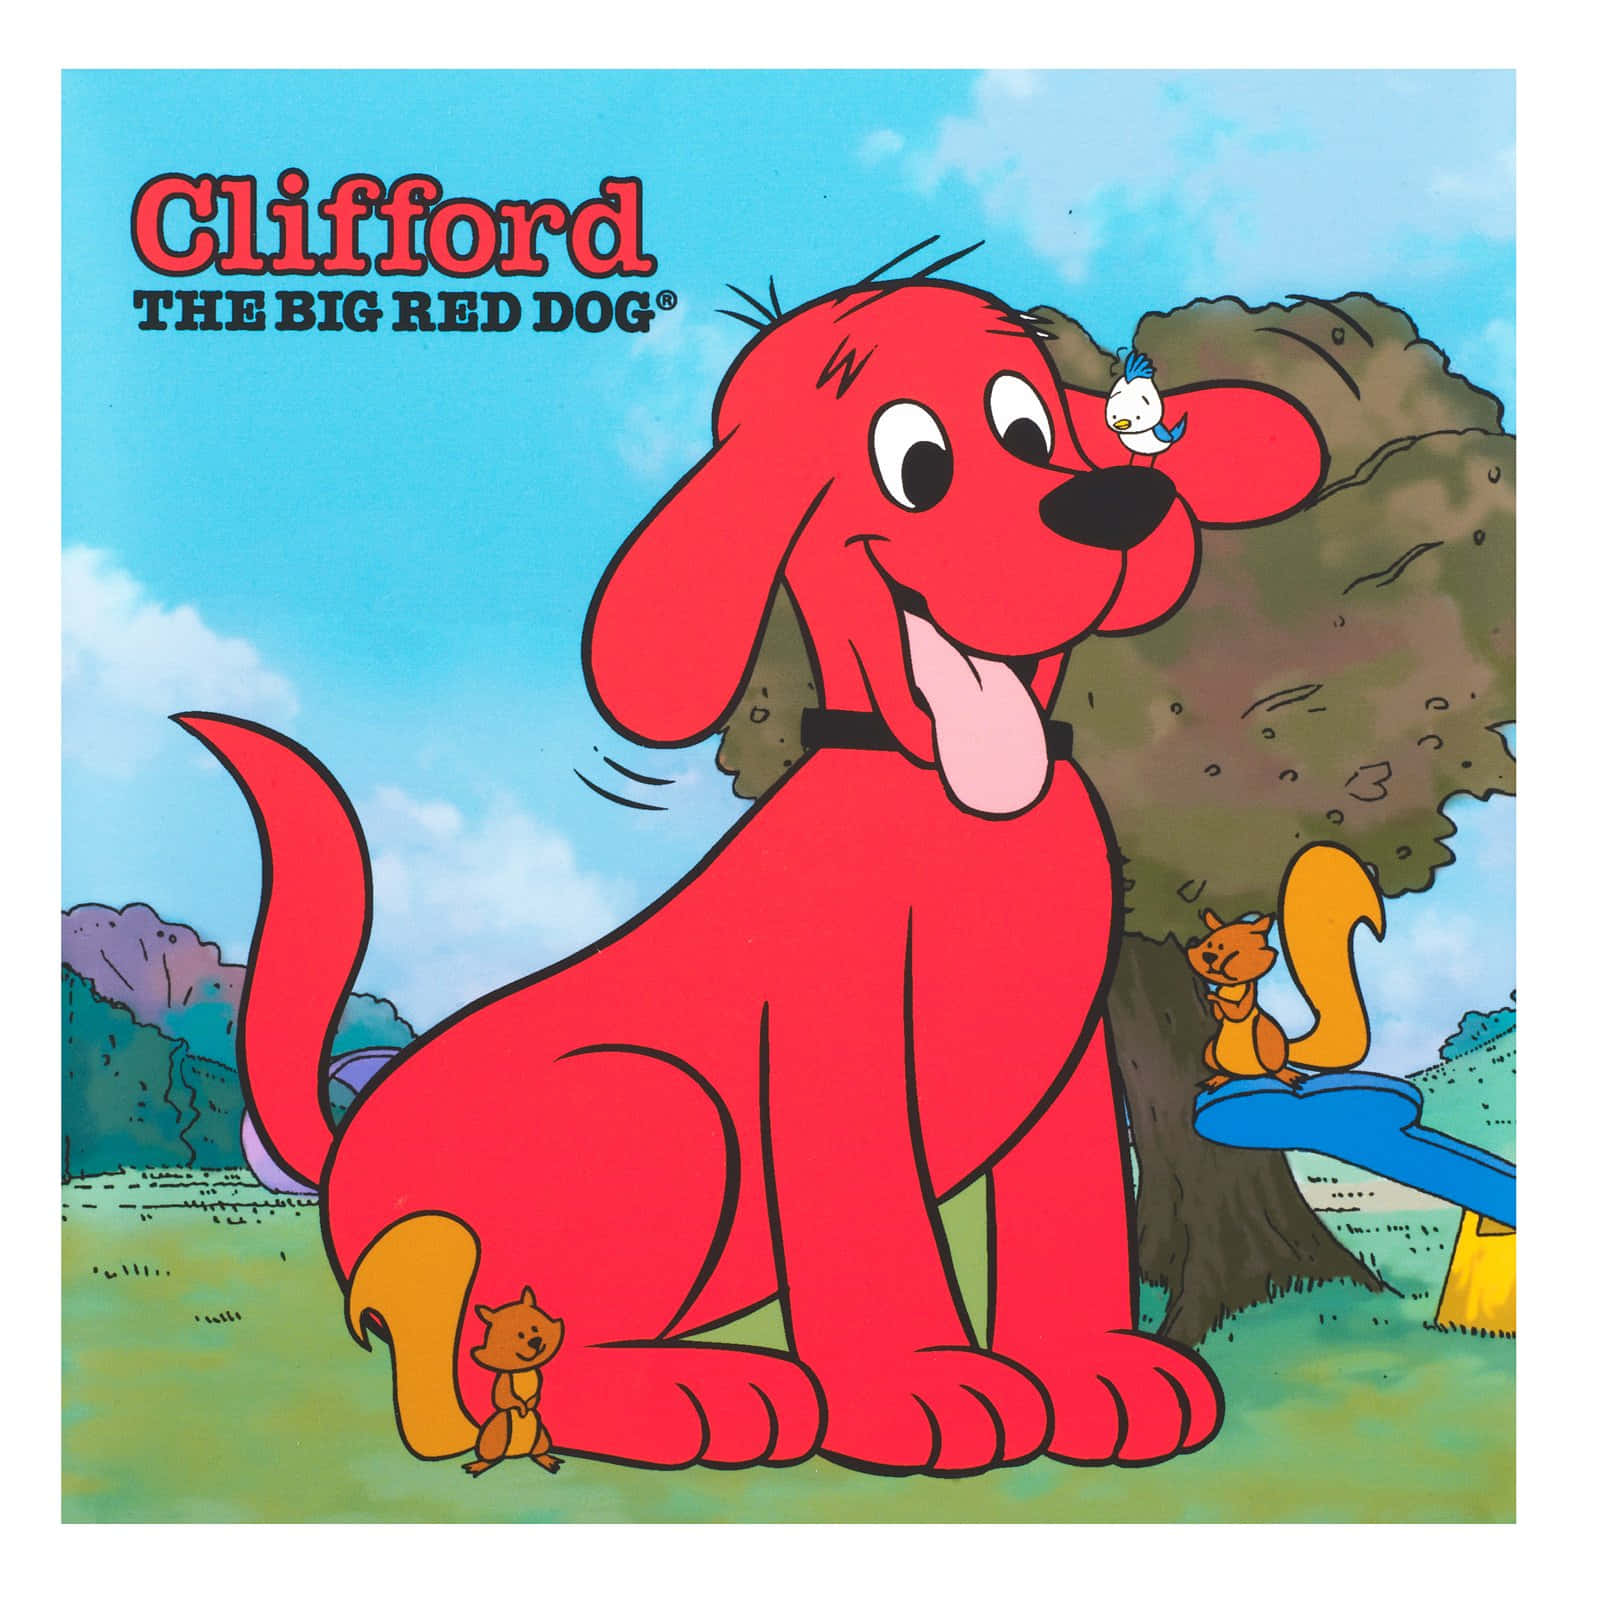 Clifford The Big Red Dog Looking Adorably Inquisitive